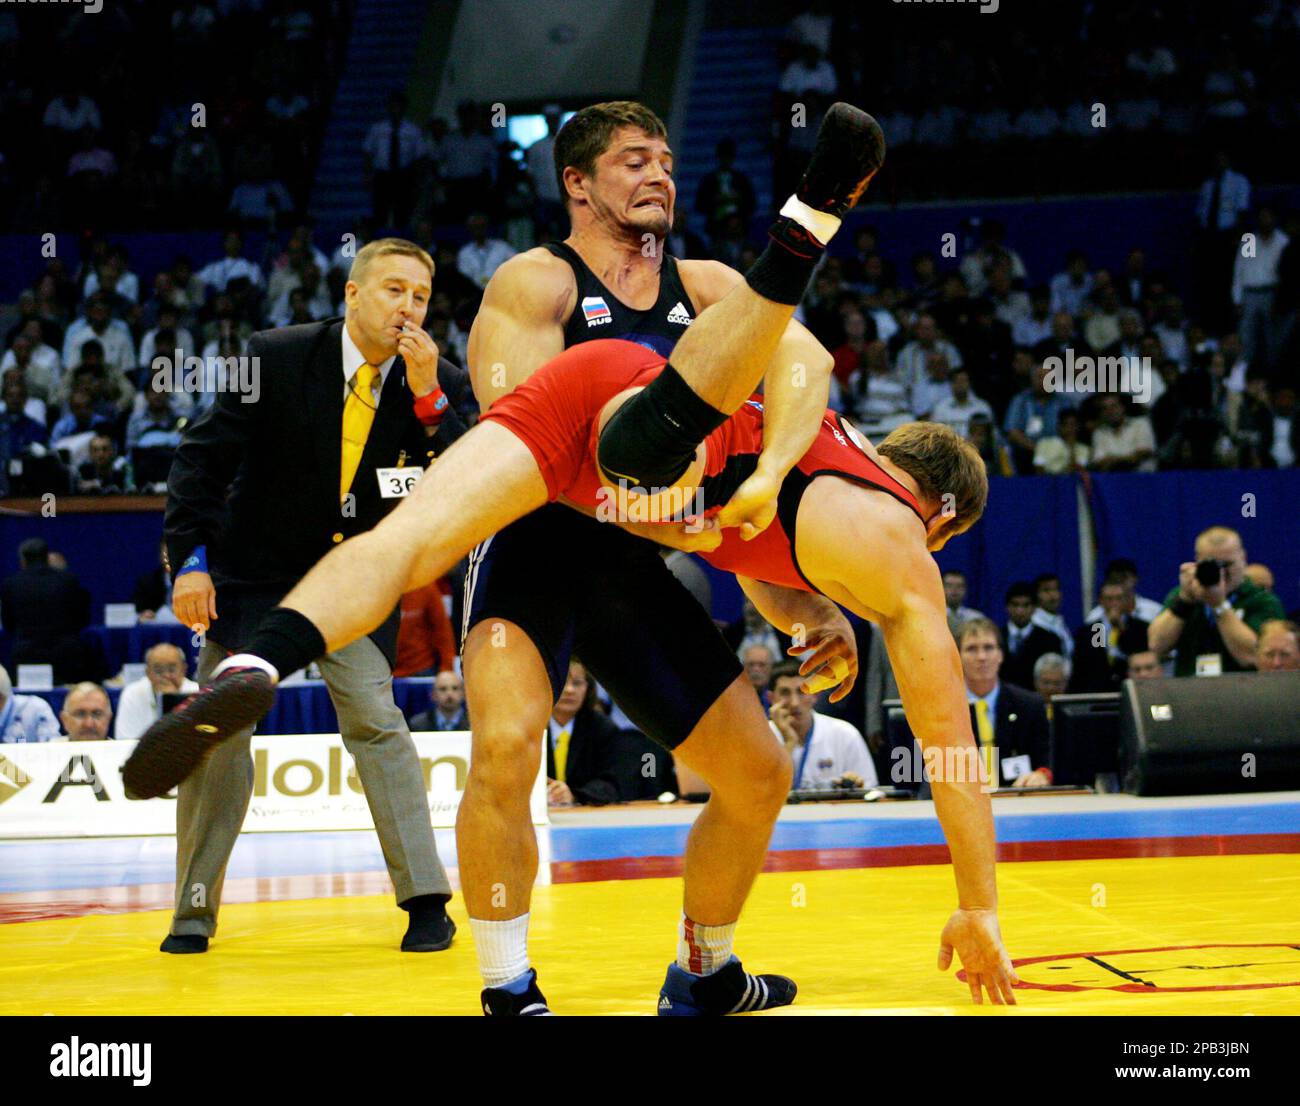 Russia's Alexey Mishin, right, wrestles with United States' Brad Vering in  the 84-kilogram Greco-Roman event final of the World Wrestling  Championships at Geidar Aliev sports arena in the Azerbaijani capital Baku,  Tuesday,